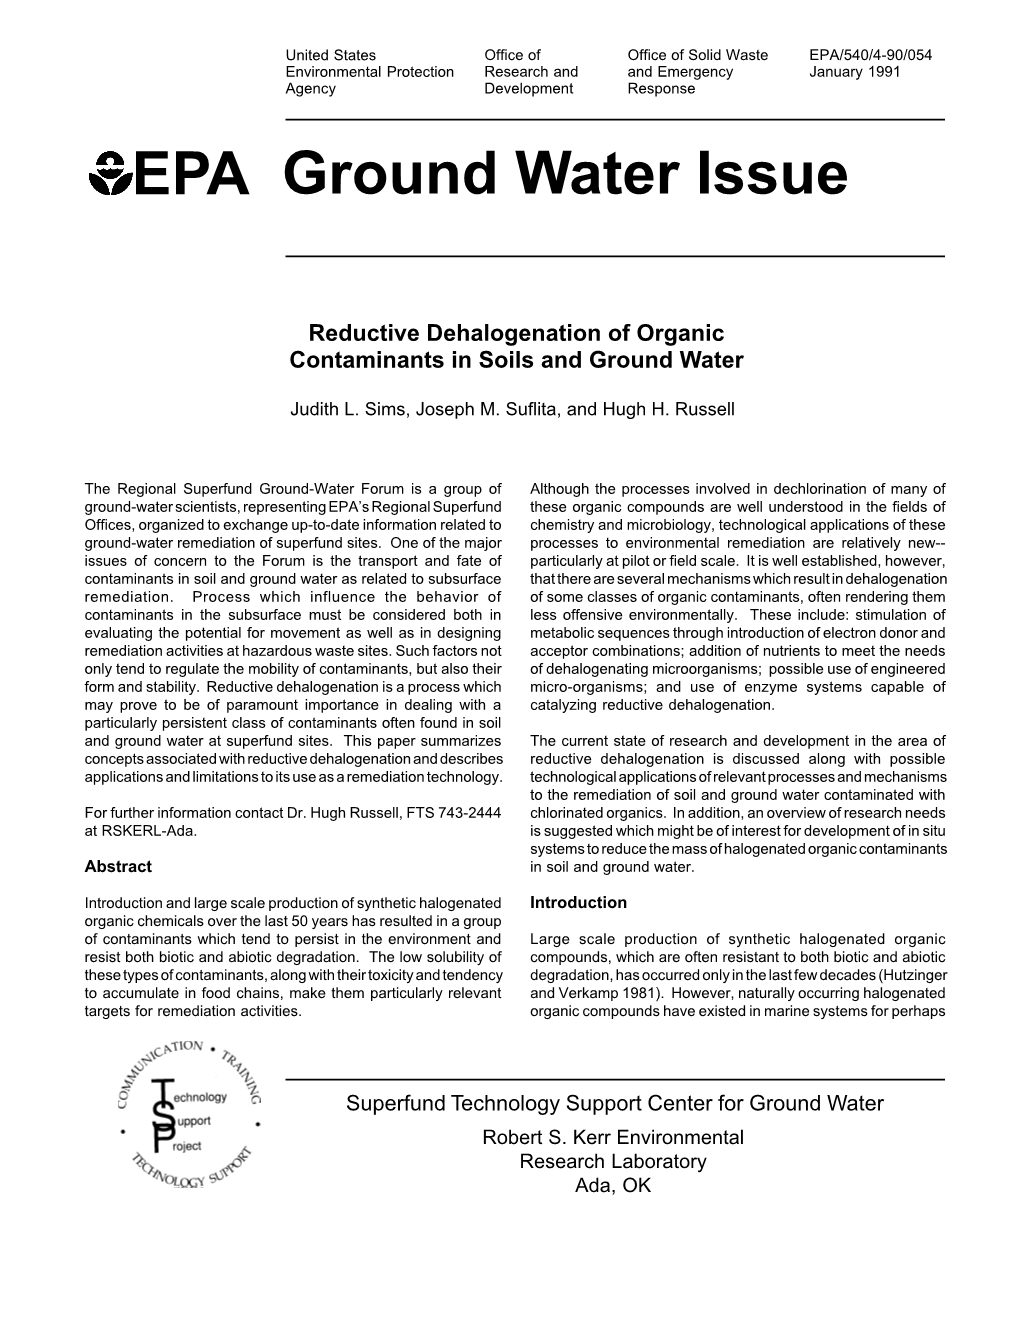 Reductive Dehalogenation of Organic Contaminants in Soils and Ground Water